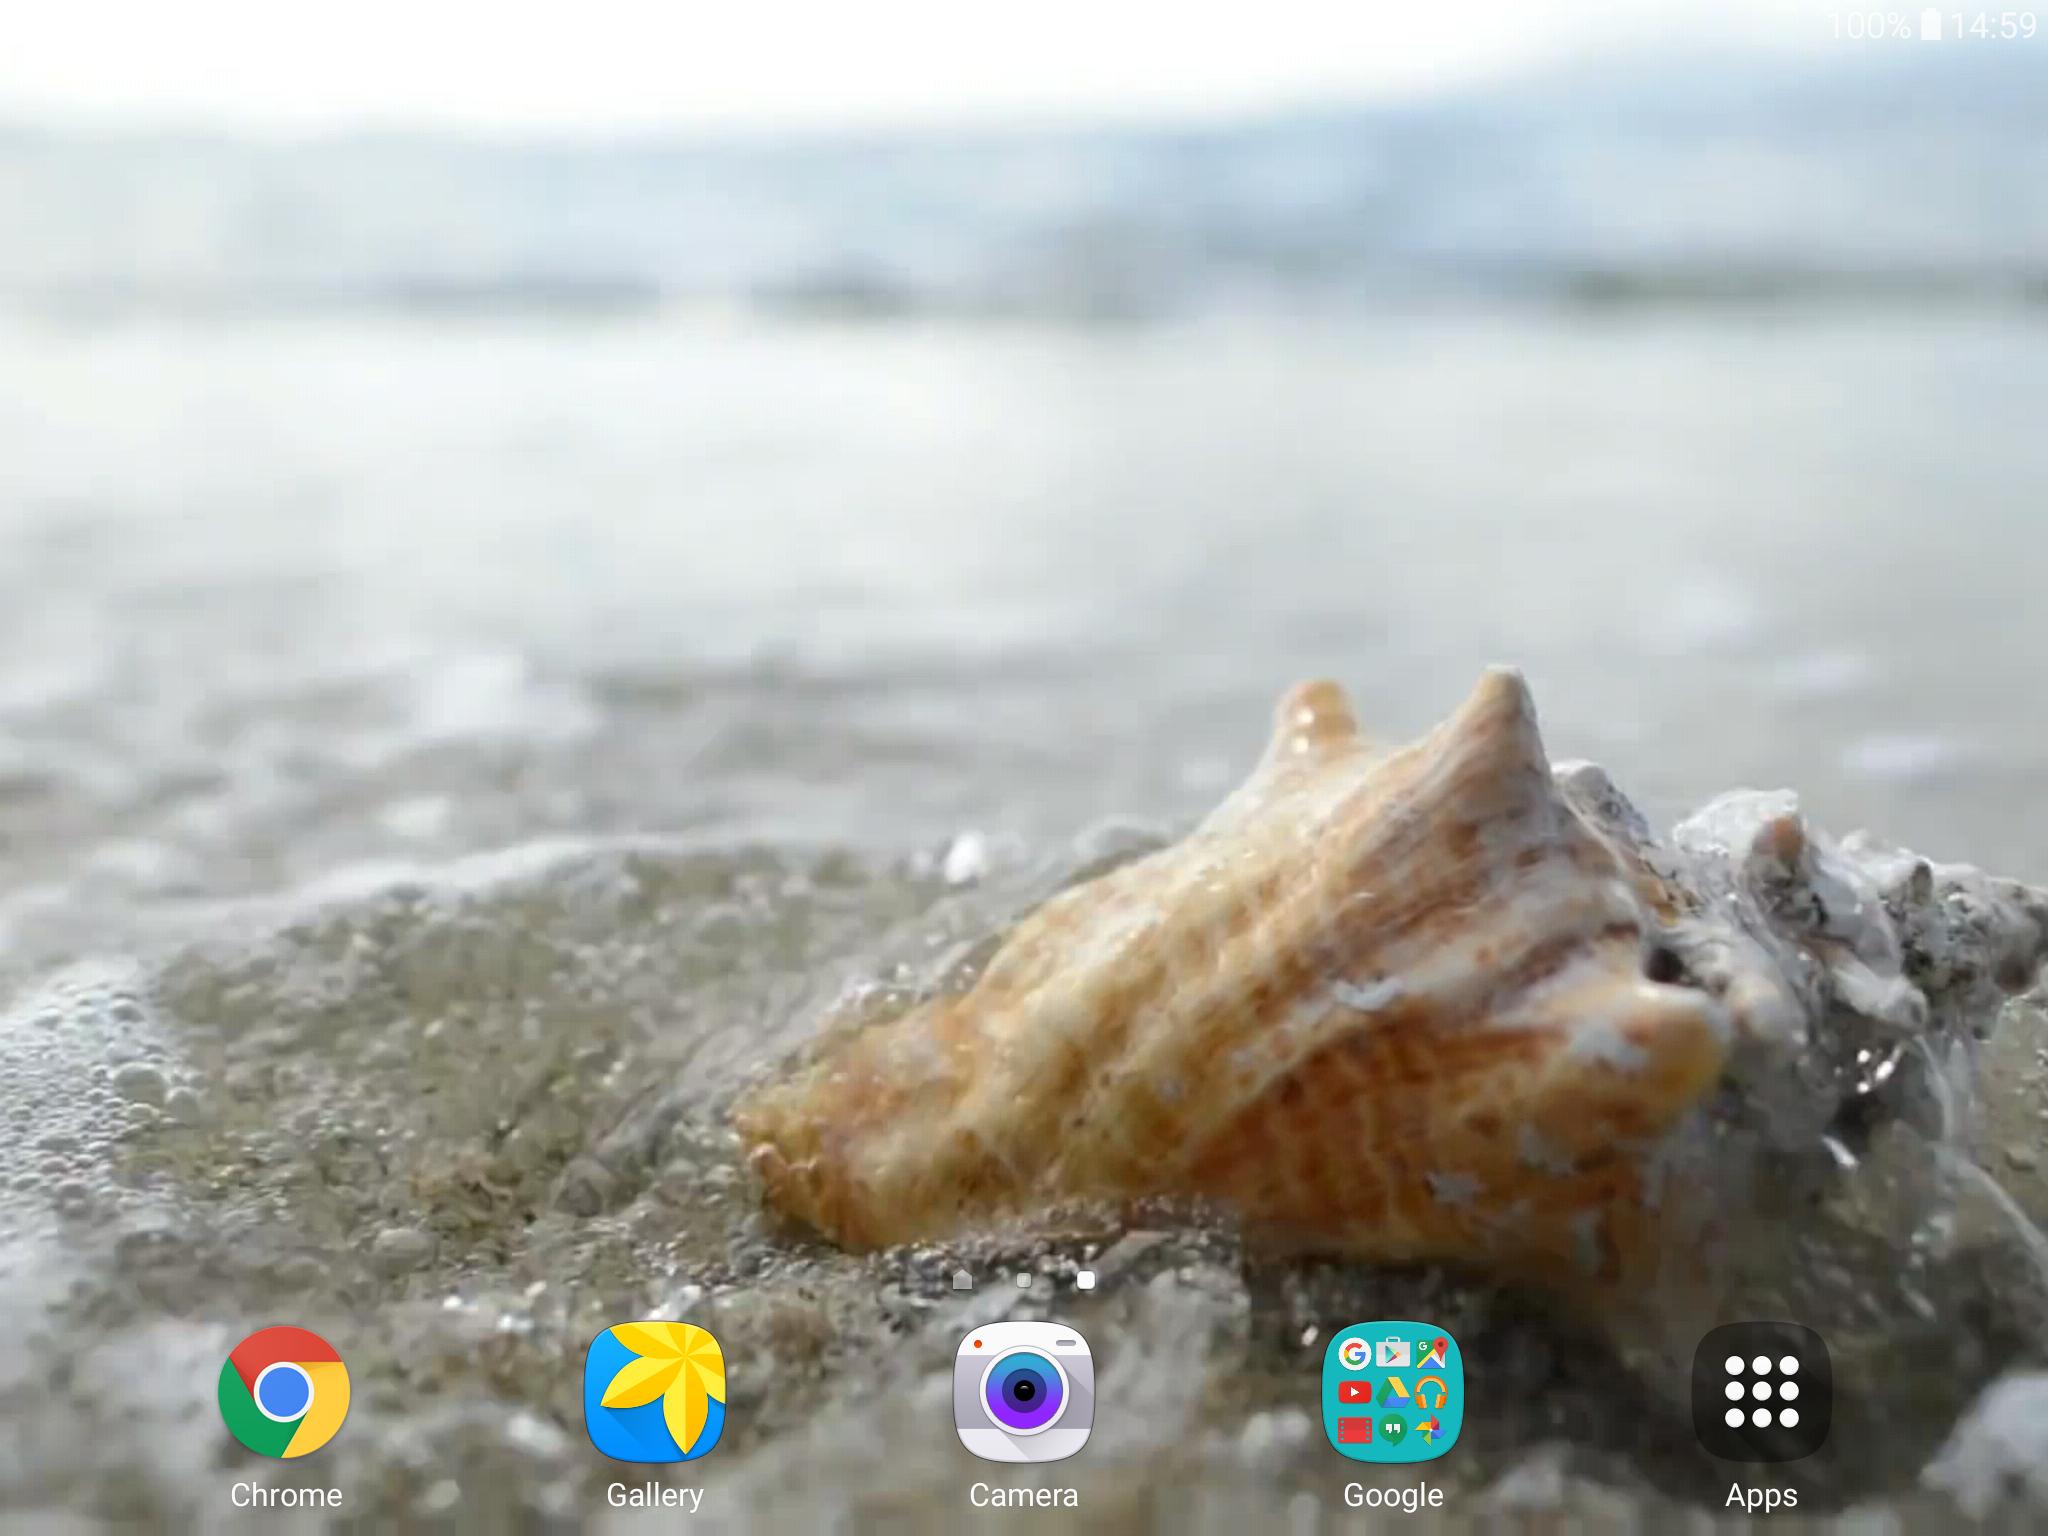 Sea Shell 4k Live Wallpaper For Android Apk Download Images, Photos, Reviews